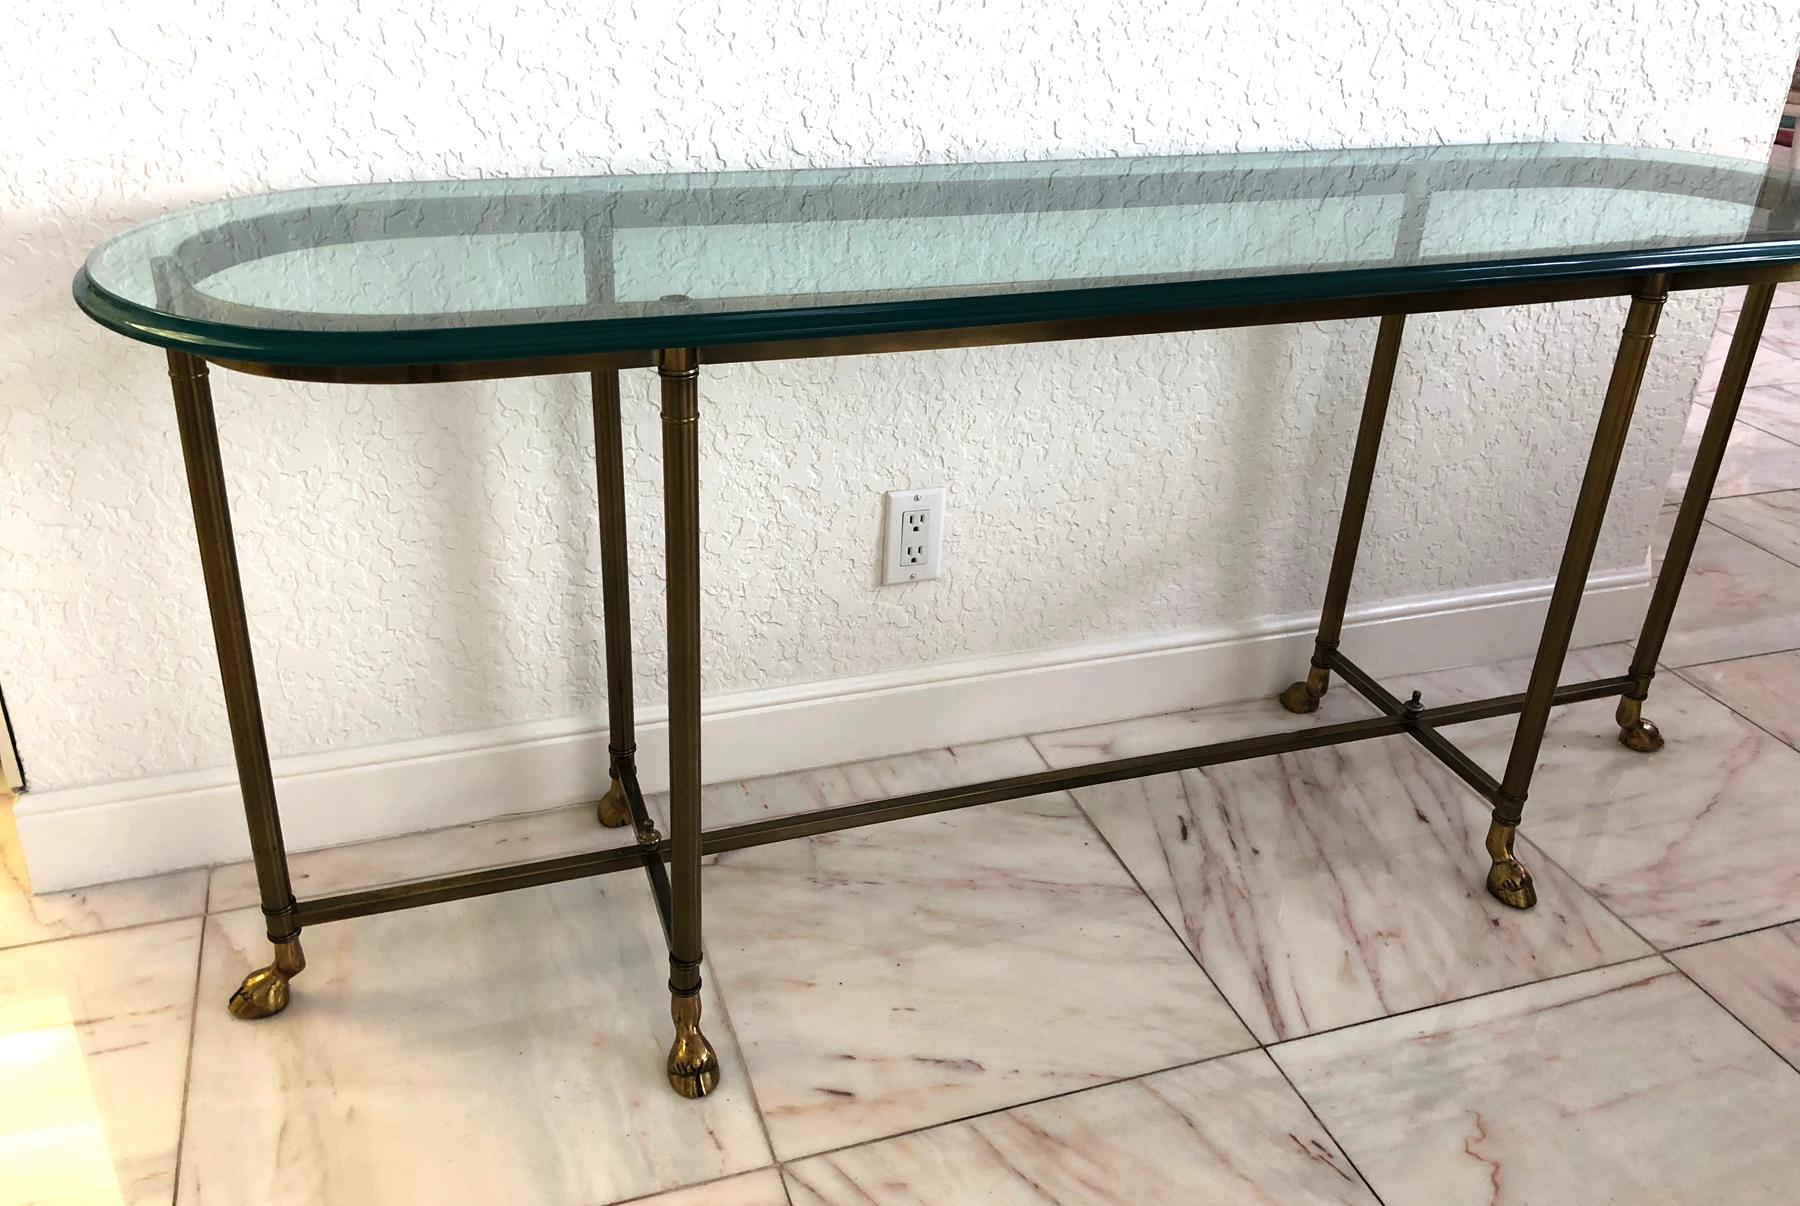 Large Hollywood Regency brass console table with thick beveled edge glass top. Large hoof feet in the style of Jansen. Rounded ends add a soft look to table. Measures: 65 wide by 18 deep by 28 inches high.